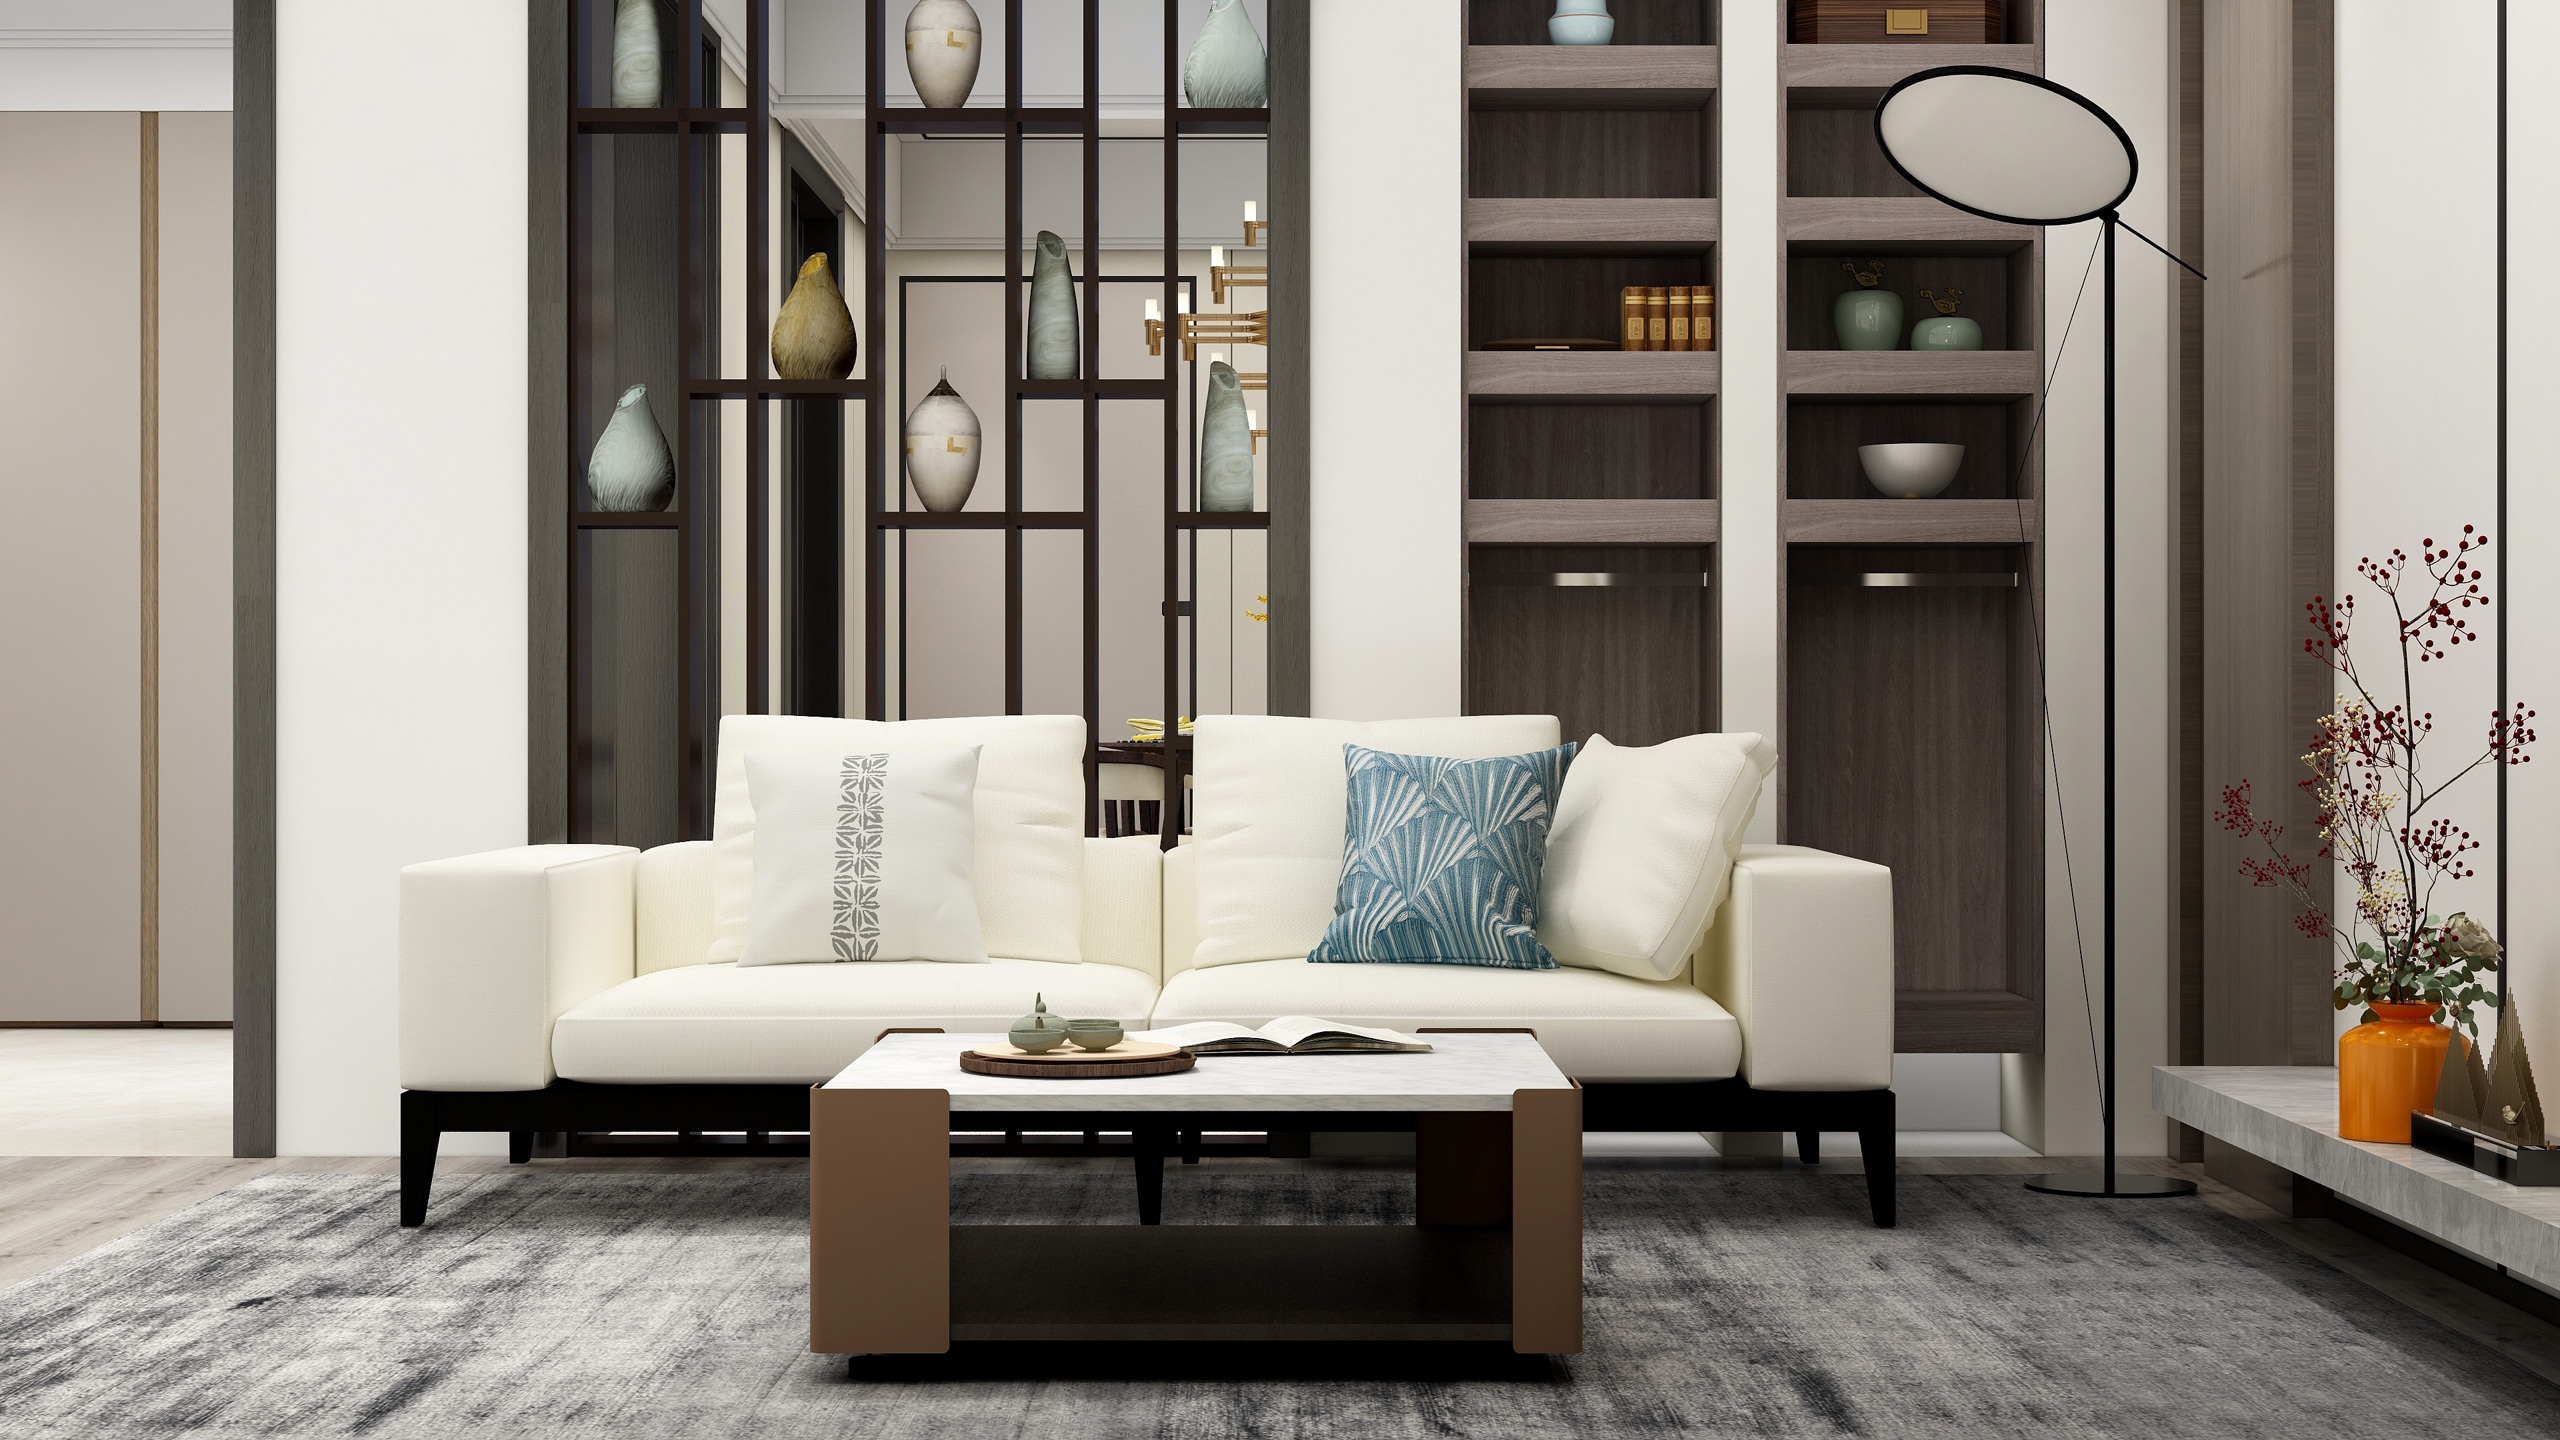 Moodie Sofa - Zen Like Interiors with Oriental Influence | Camerich USA